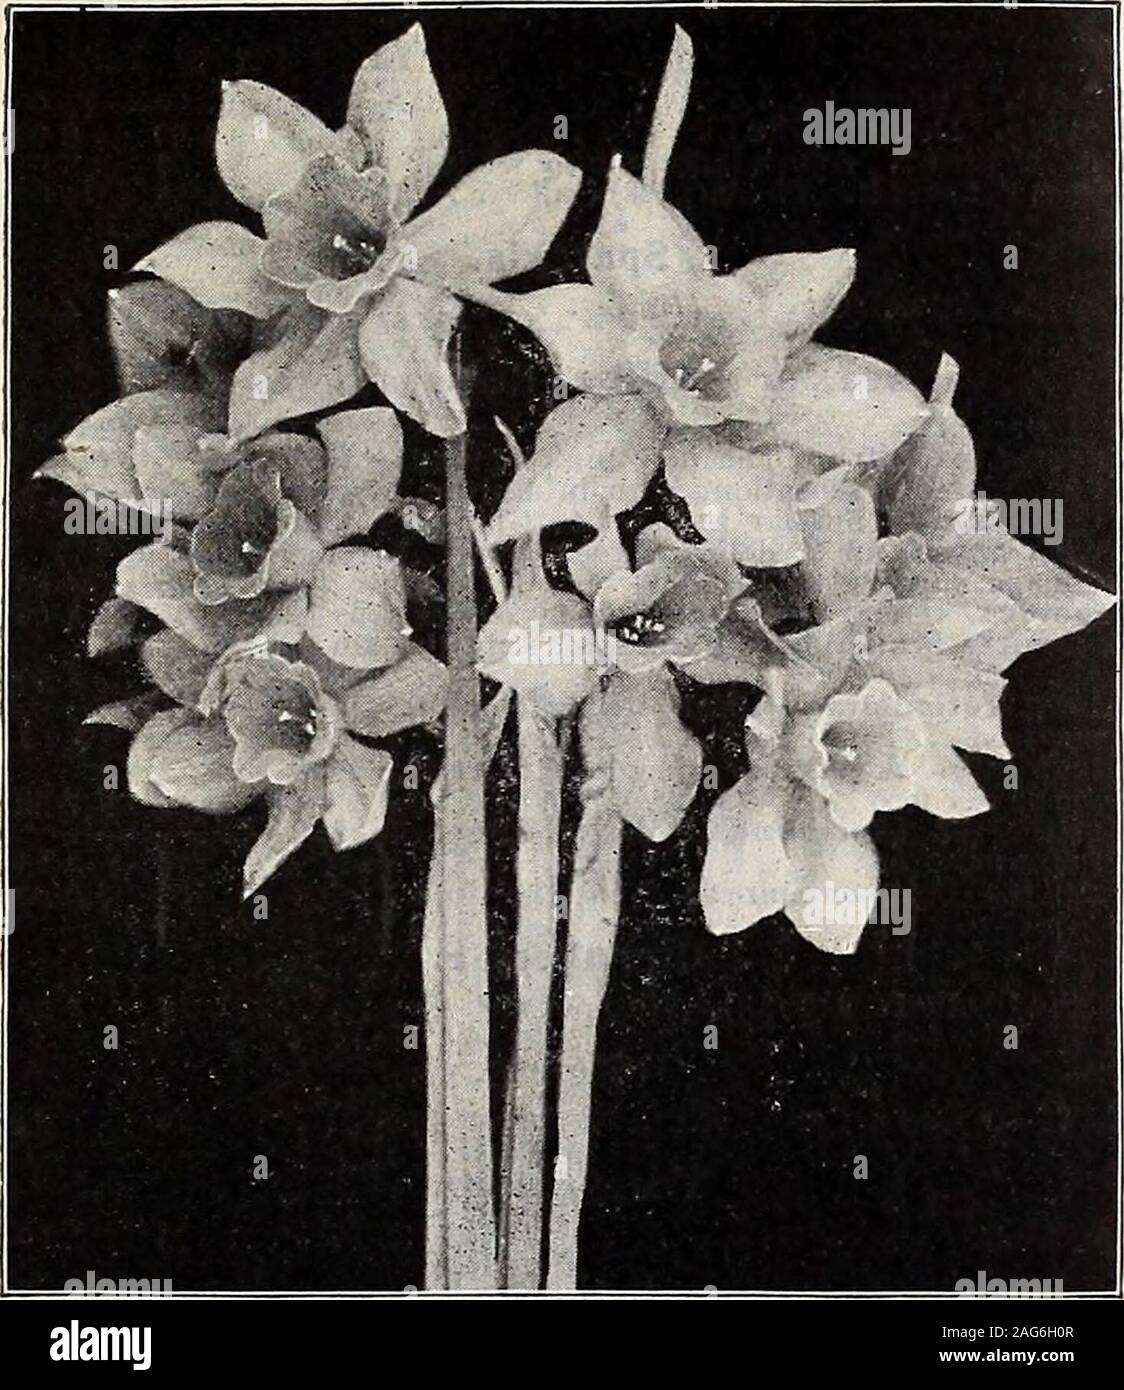 . Dreer's wholesale price list : bulbs for florists flower seeds for florists plants for florists vegetable seeds, fungicides, fertilizers, insecticides, implements, sundries, etc. GLADIOLUS BLUSHING BRIDE HENRY A. DREER, PHILADELPHIA, PA., WHOLESALE PRICE LIST 11. CAMPERNELLE JONQUILS Helleborus (Christmas Rose).Niger. Strong clumps {ready in November) . Hemerocailis (Plantain Lilies)See under Hardy Perennials, pages 24 to 34. Incarvillea (Hardy Gloxinia).See under Hardy Perennials, pages 24 to 34. Per doz. Per loo $2 25 117 50 Ixias. Per 100 Per 1000 Crateroides. Fiery scarlet $! 25 |io 00 5 Stock Photo